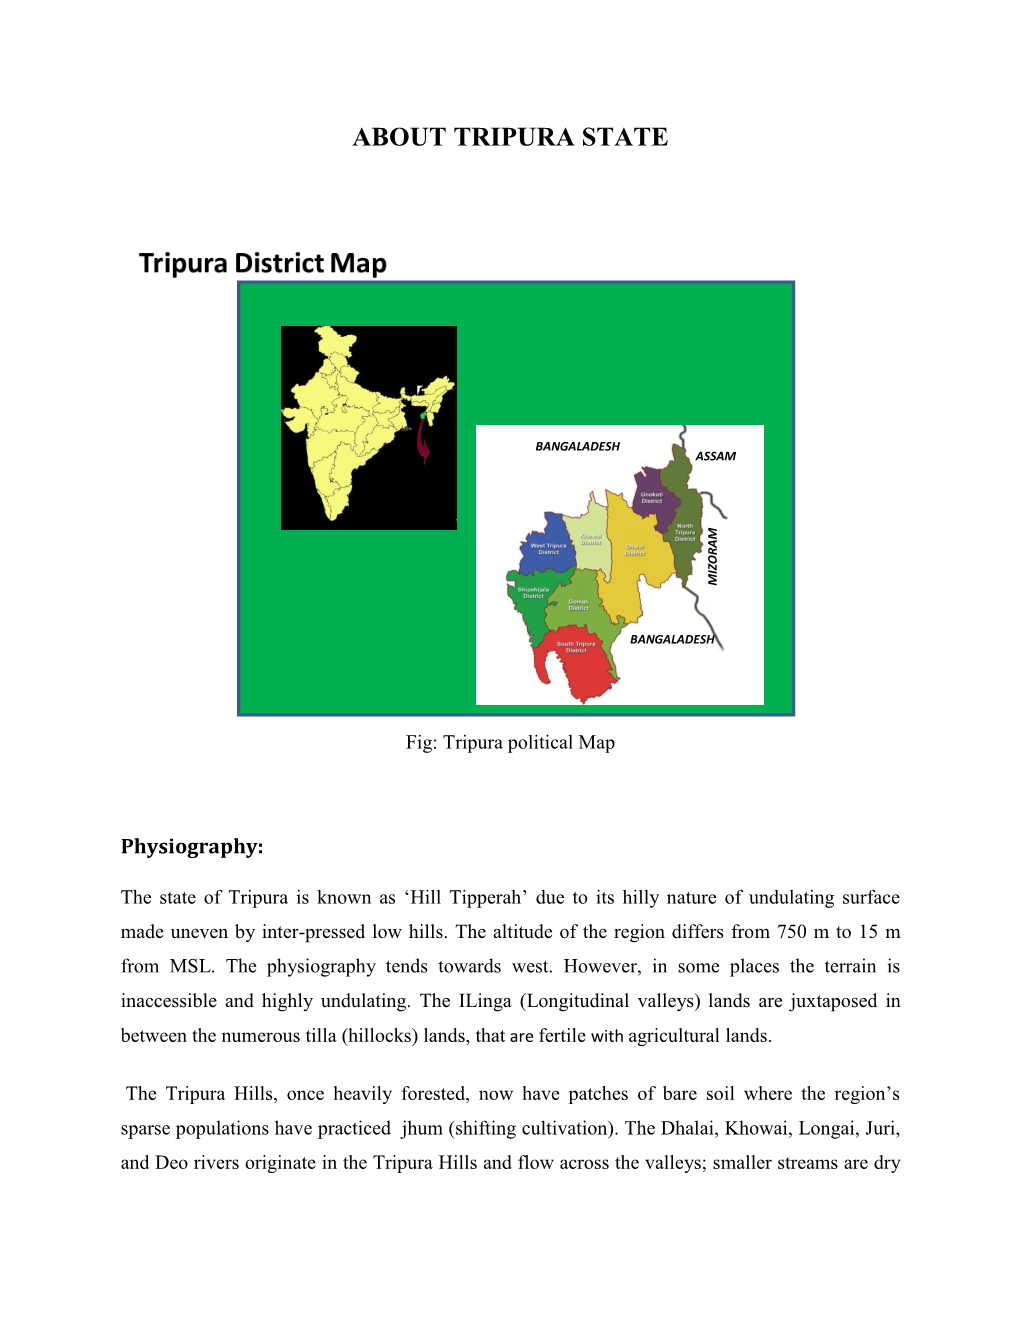 About Tripura State